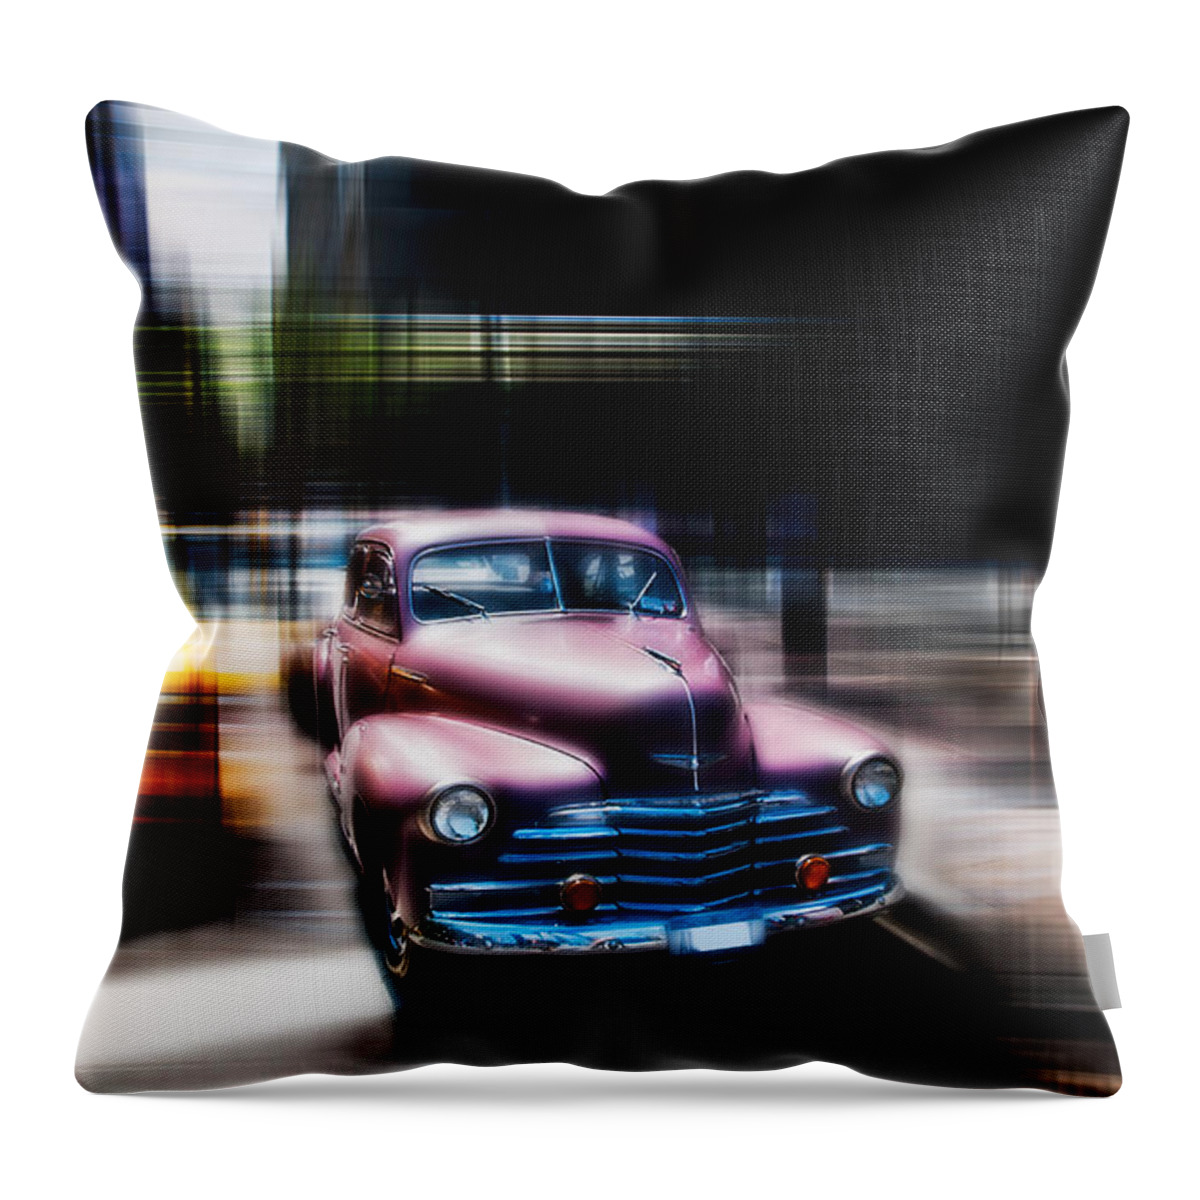 Nyc Throw Pillow featuring the photograph attracting curves III2 by Hannes Cmarits